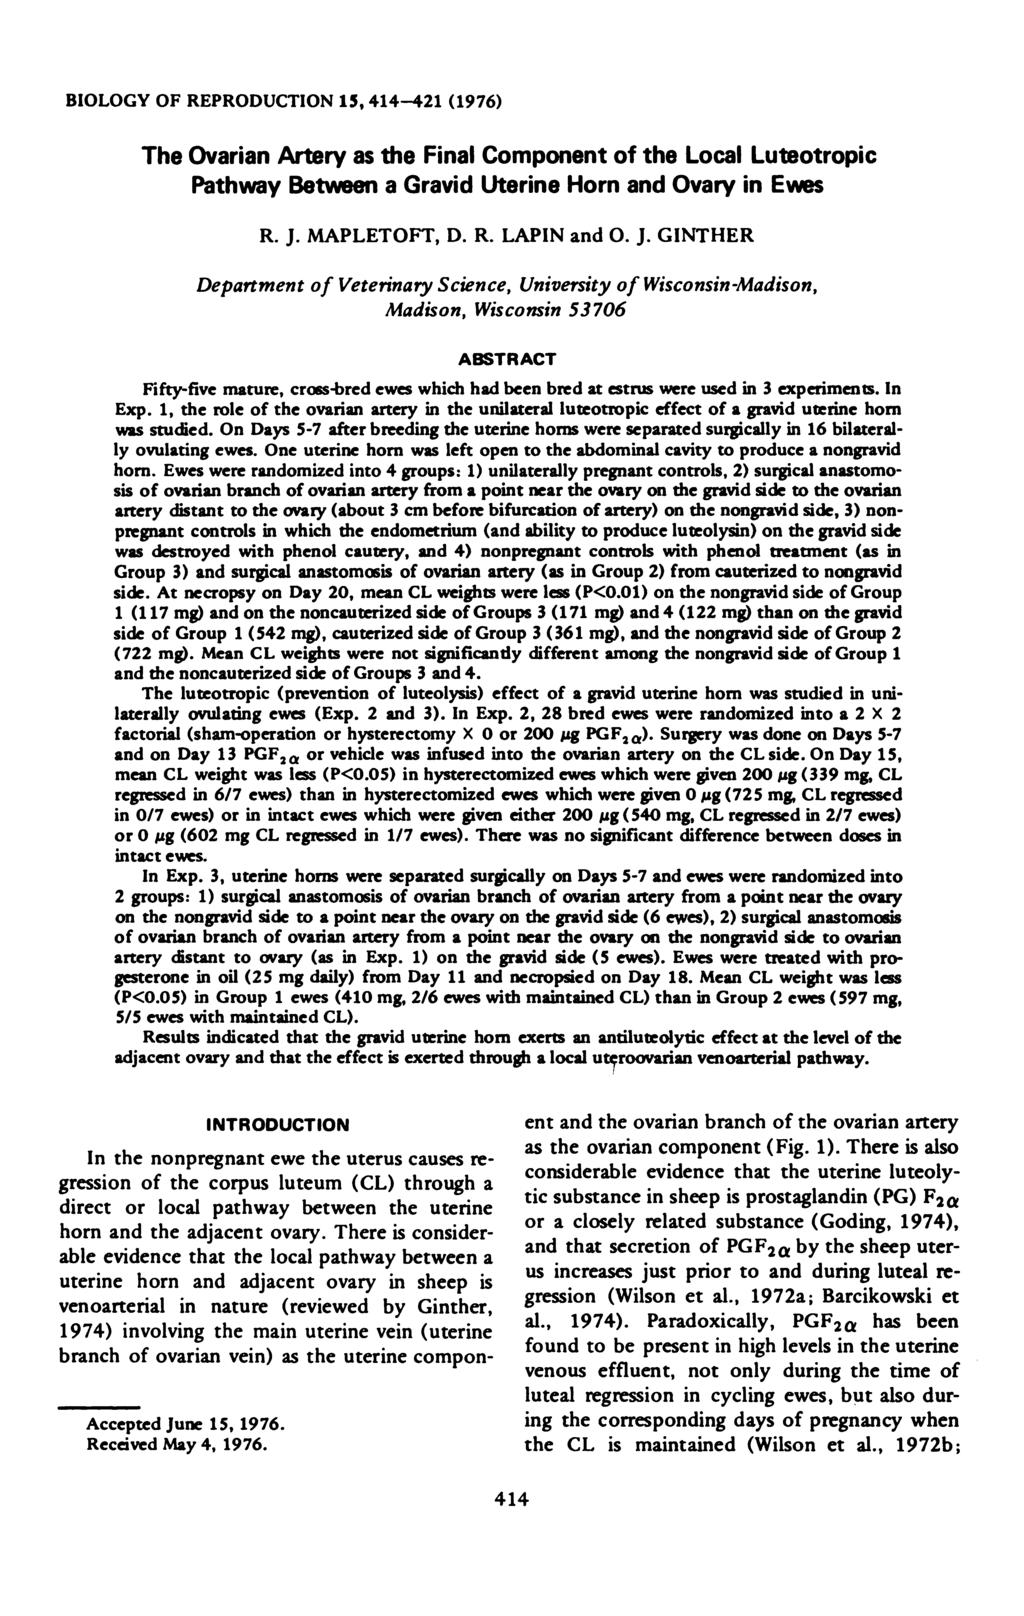 BIOLOGY OF REPRODUCTION 15, 414-421 (1976) The Ovarian Artery as the Final Component of the Local Luteotropic Pathway Between a Gravid Uterine Horn and Ovary in Ewes R. J. MAPLETOFT, D. R. LAPIN and 0.